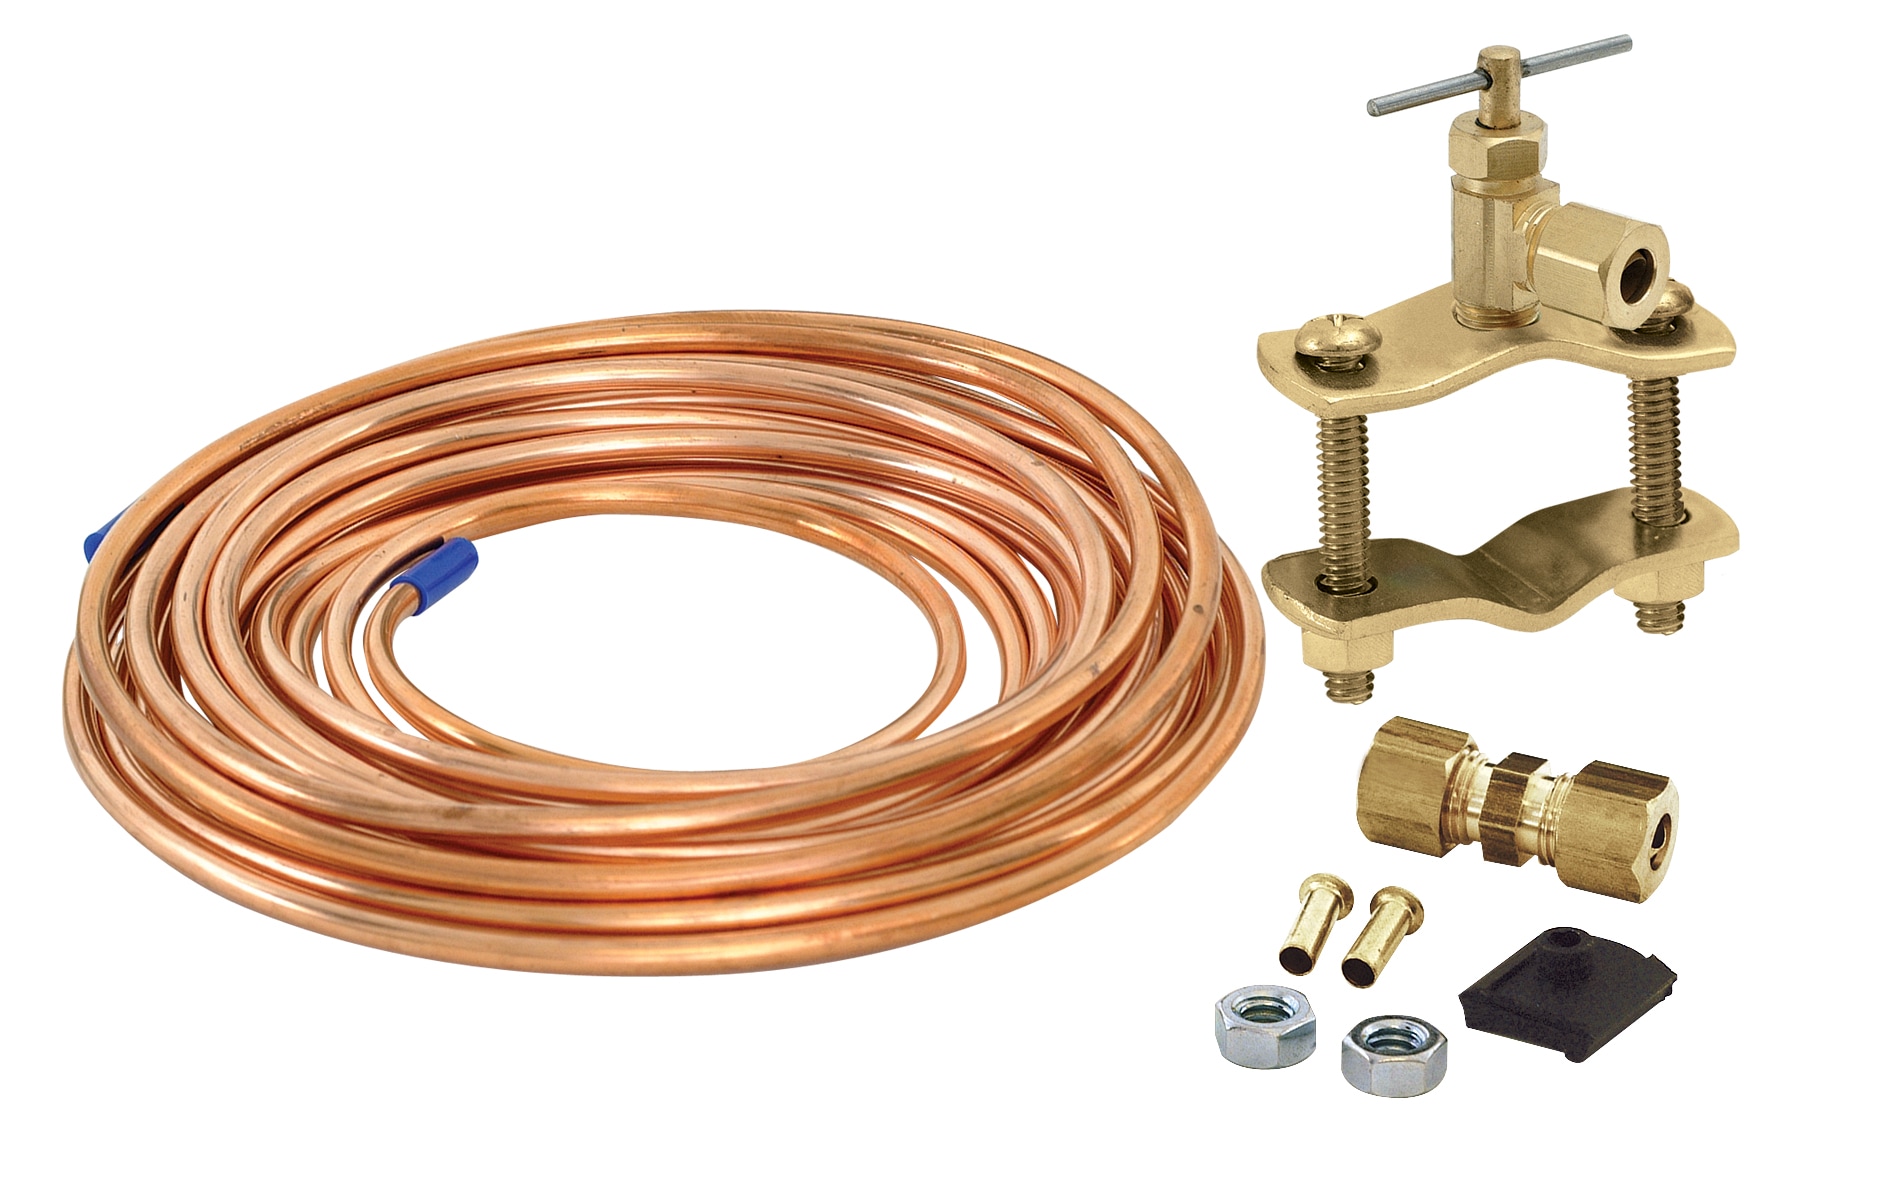 Ice Maker Installation Kit - 1/4 In ODRefrigerator Water Line with Quick  Fittings and Self Piercing Saddle Valve,For Adding a Branch Waterway to